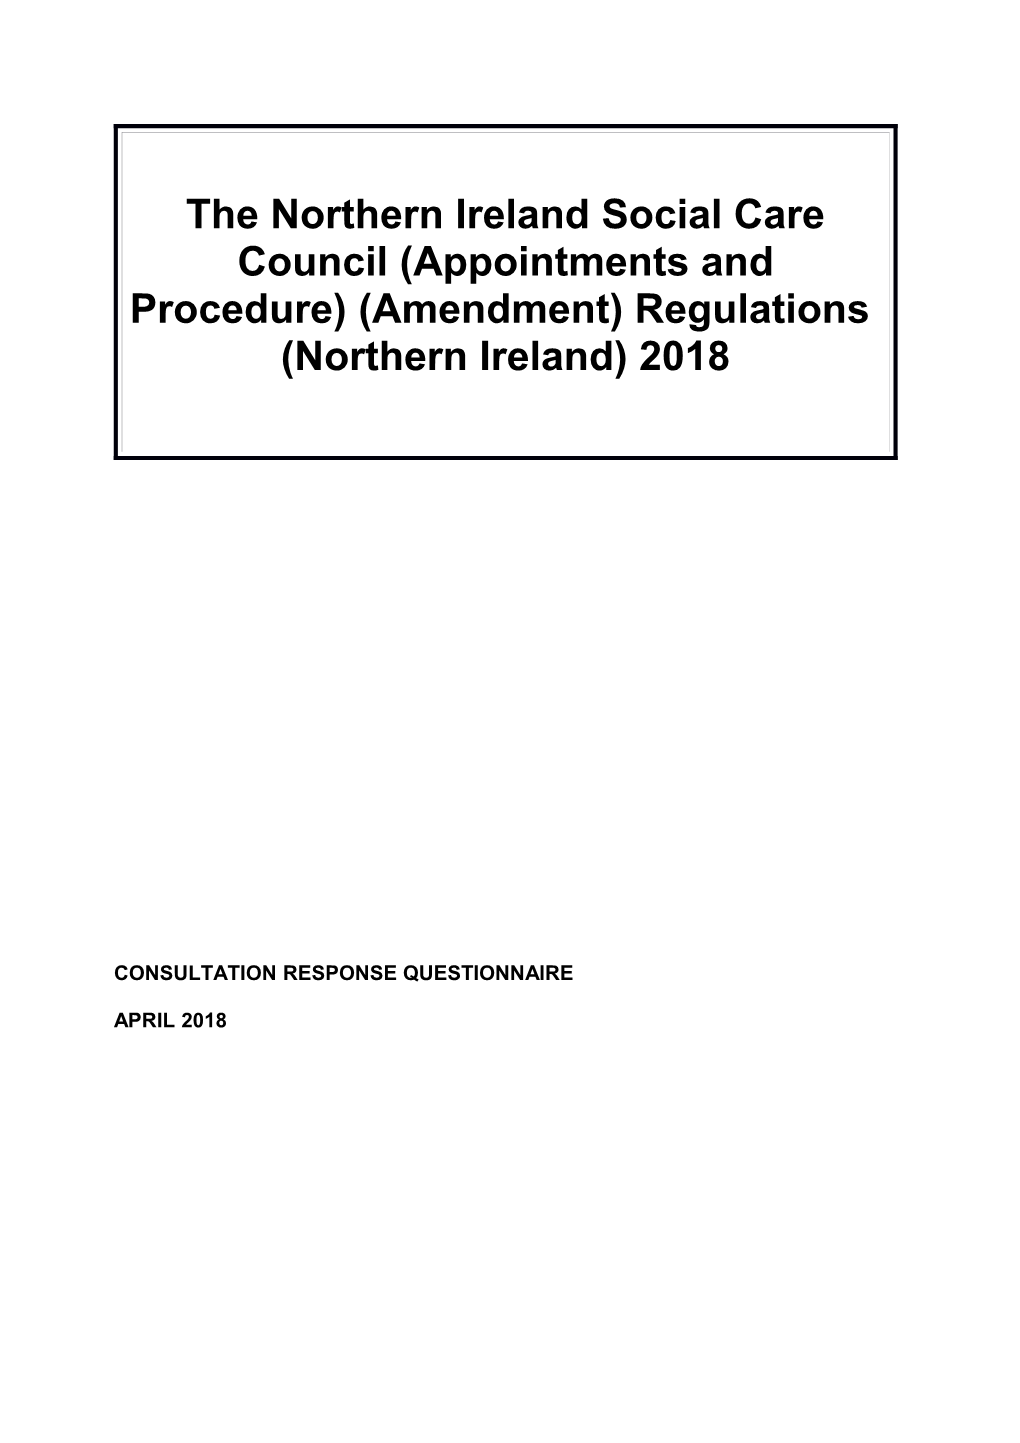 The Northern Ireland Social Care Council (Appointments and Procedure) (Amendment) Regulations